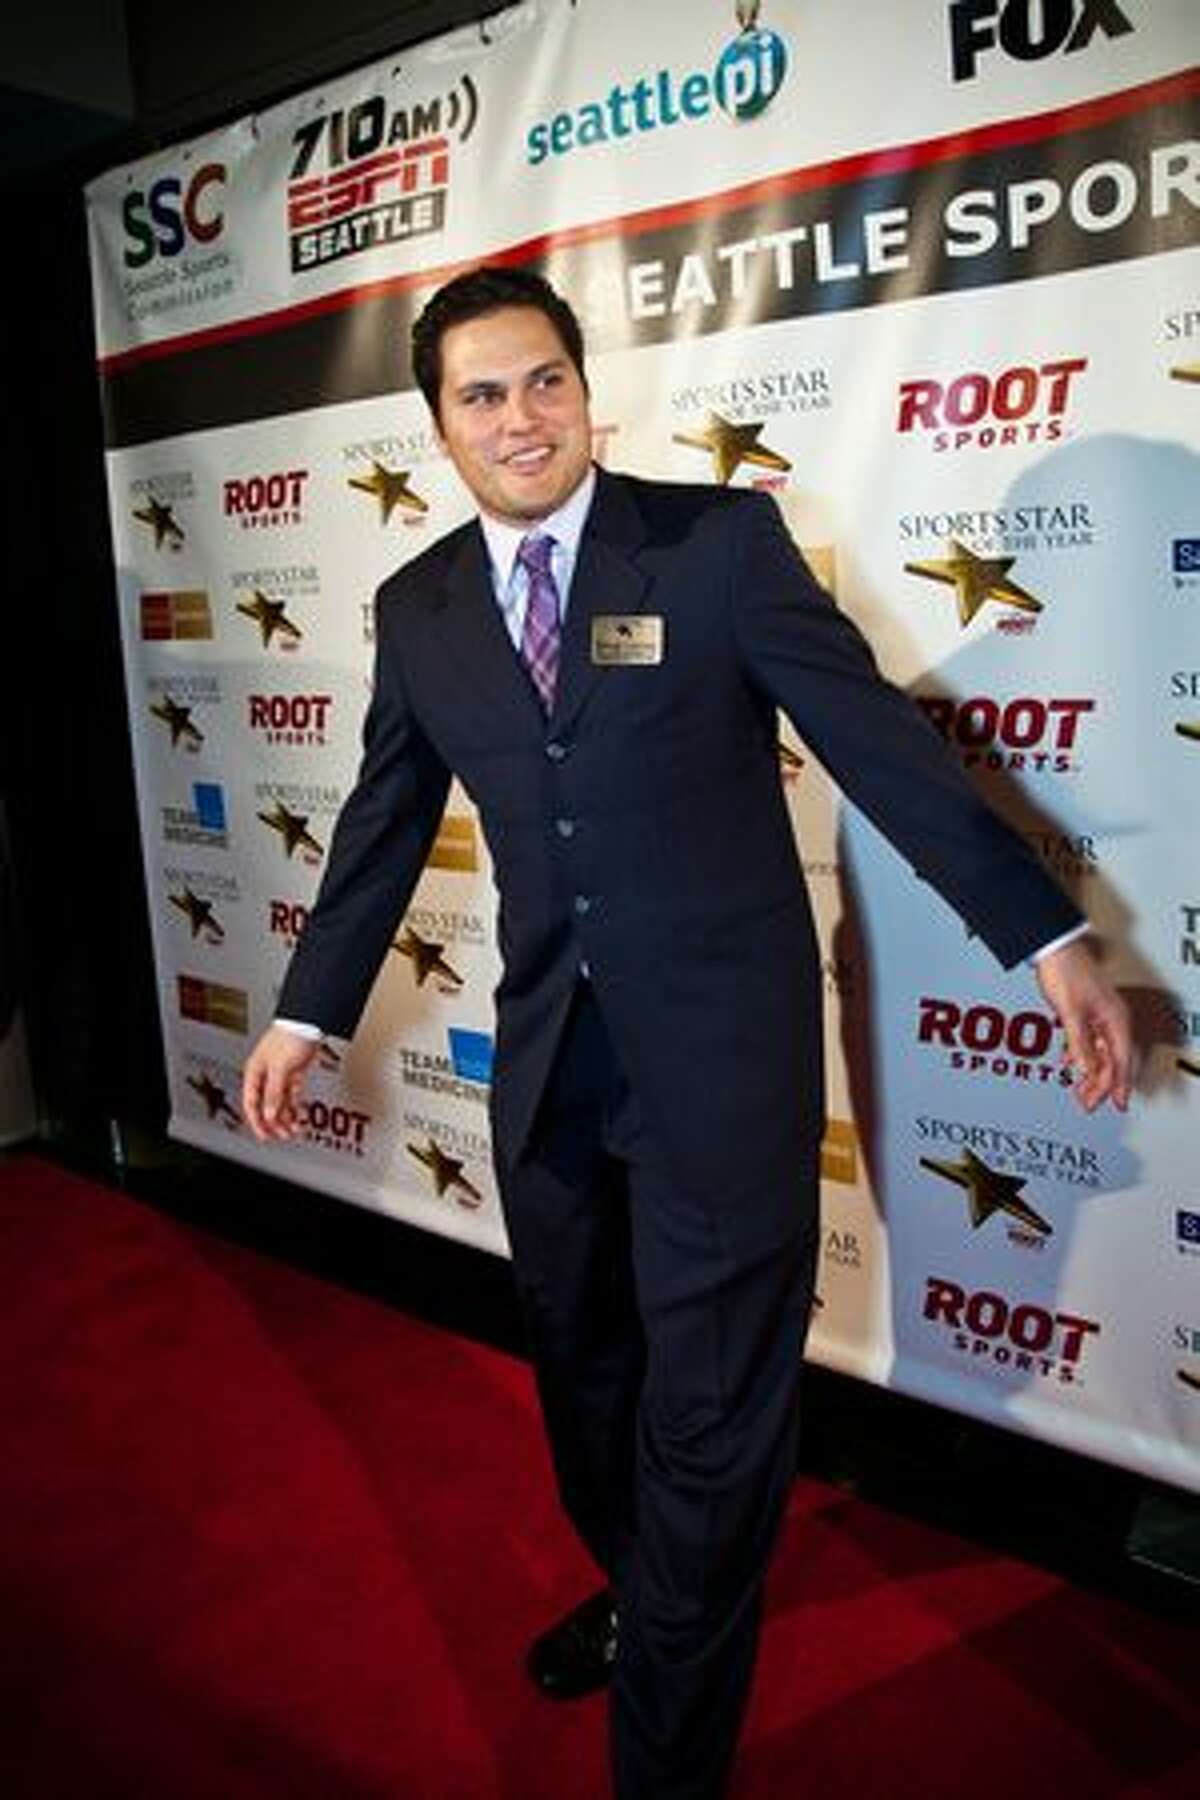 University of Washington Rose Bowl quarterback Marques Tuiasosopo arrives at the 76th Annual Sports Star of the Year, presented by ROOT SPORTS, at Benaroya Hall in Seattle Wednesday, Jan. 26, 2011. The evening honors Northwest sports stars, carrying on an annual tradition started by Seattle Post-Intelligencer sports editor Royal Brougham in 1936.